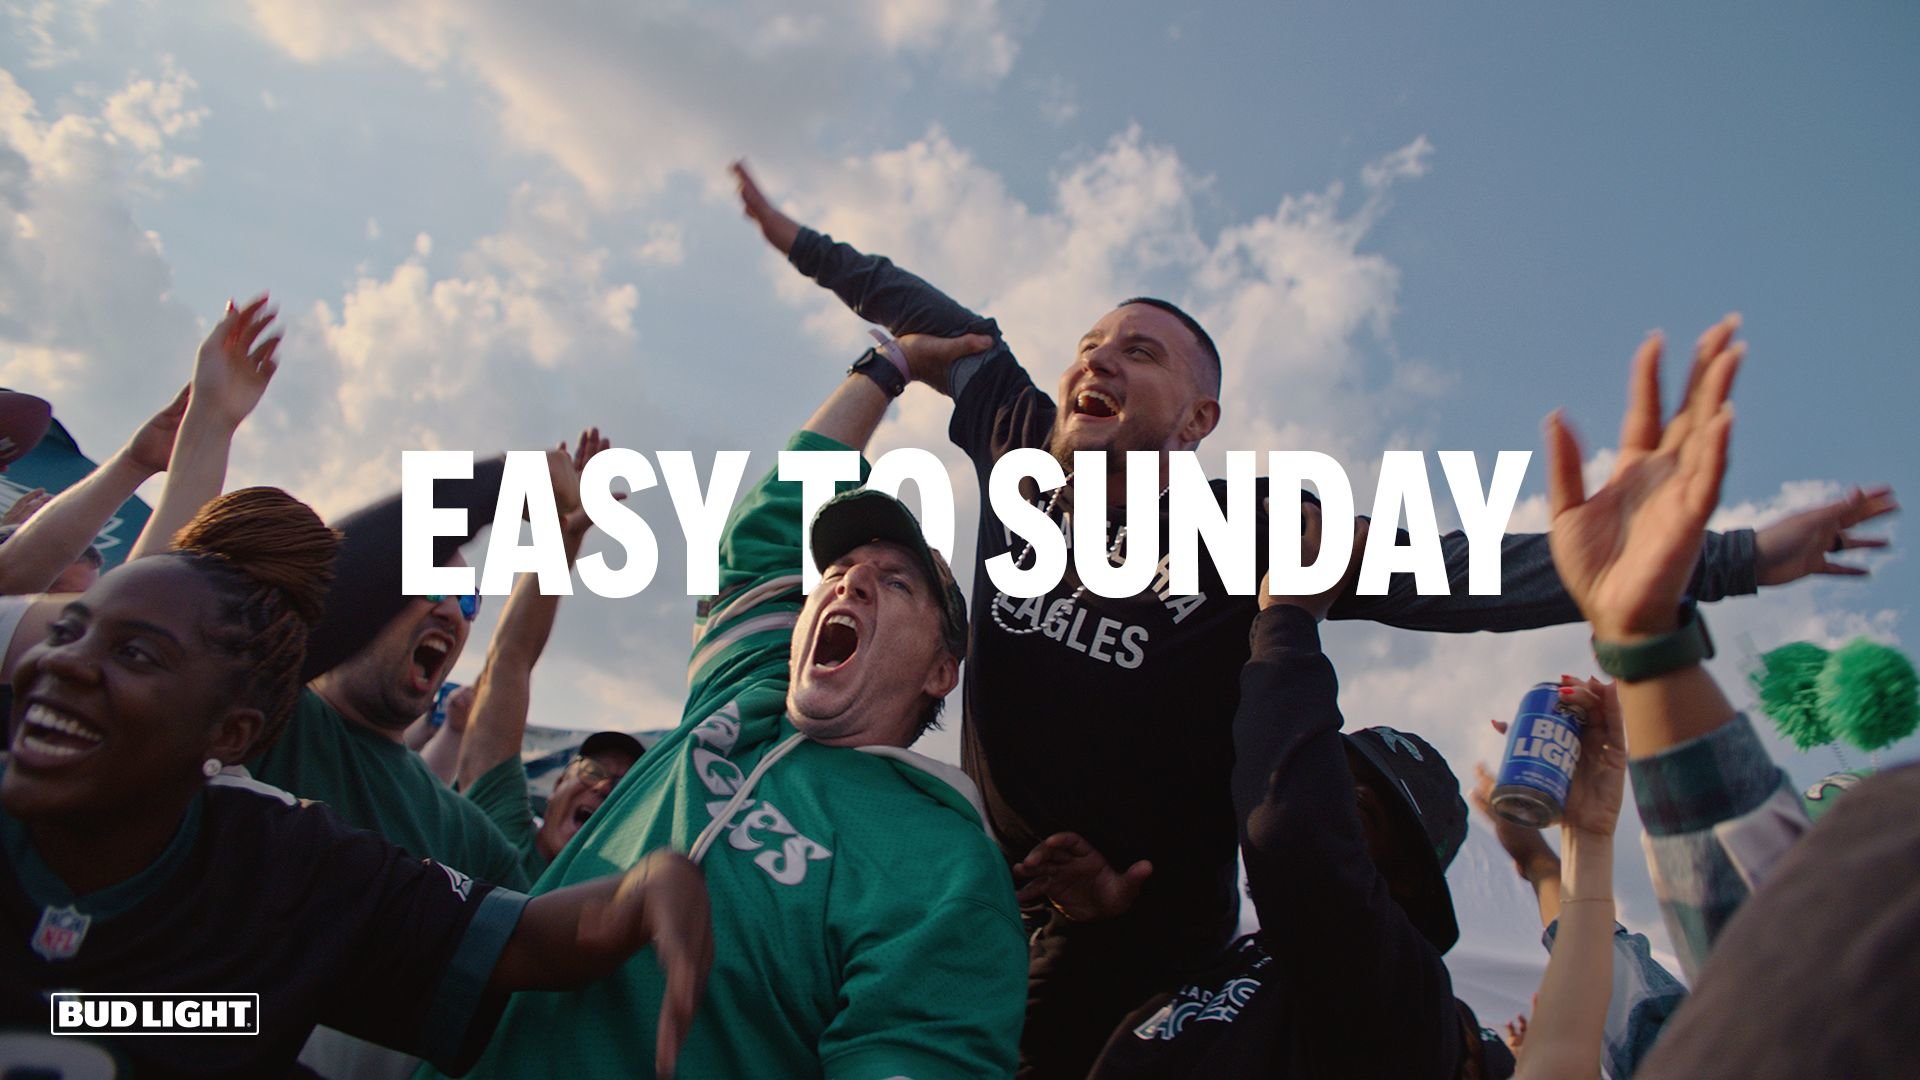 Bud Light Shows It’s “Easy To Sunday” as Brand Kicks Off One of its Biggest NFL Seasons with New Commercial Starring Real Fans and Real Traditions